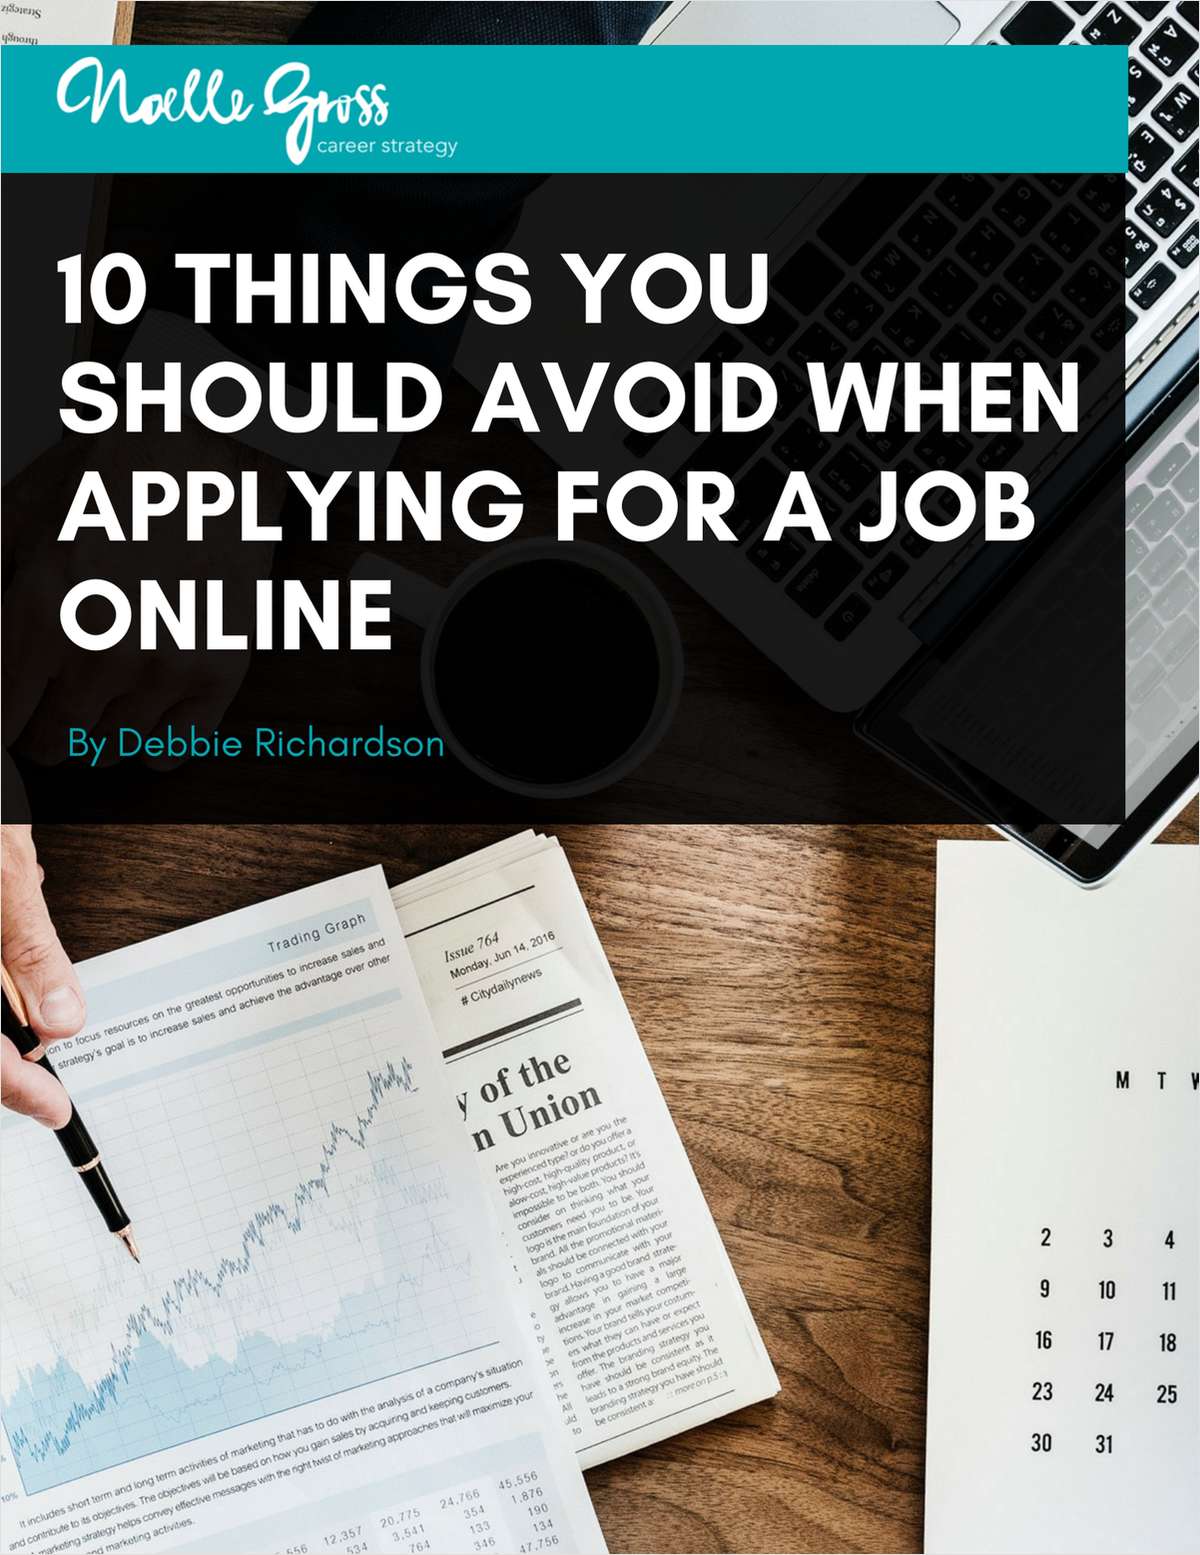 10 Things You Should Avoid When Applying For a Job Online